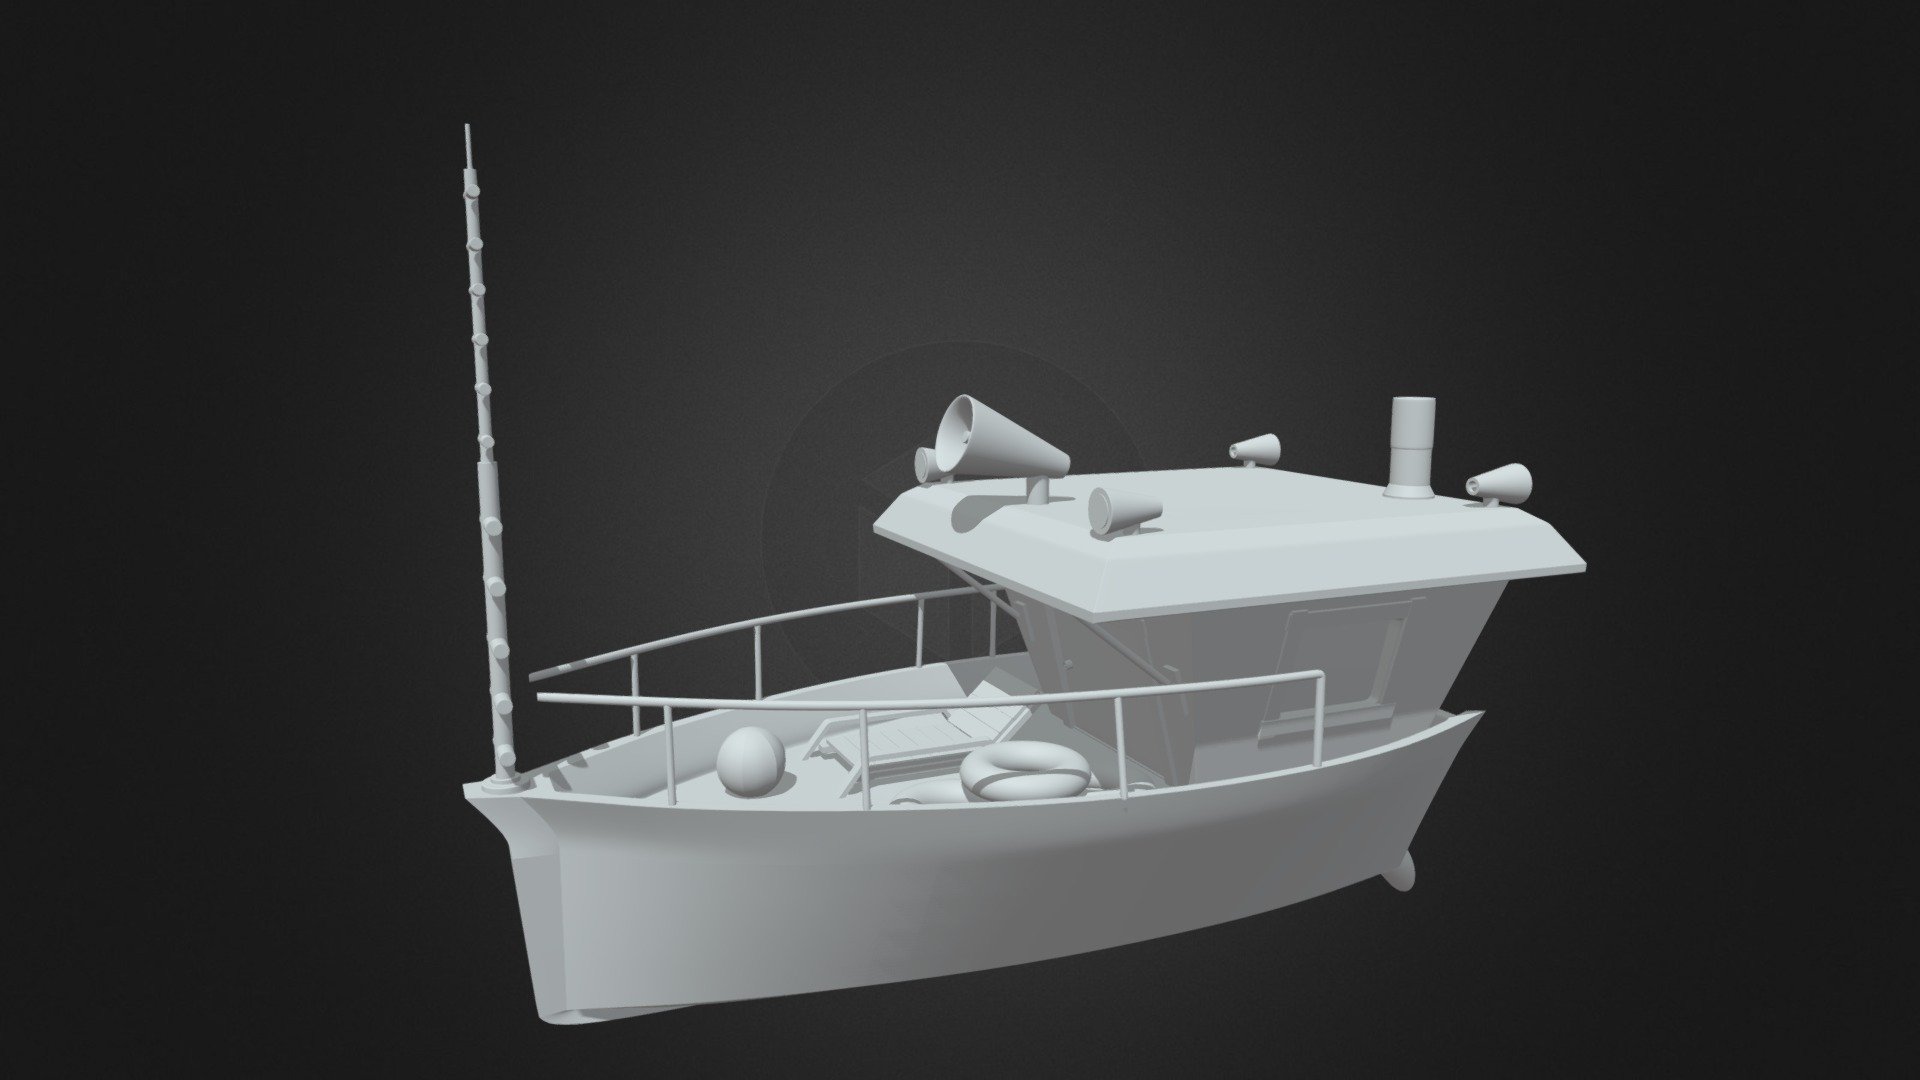 Cartoon ship

Created this 3d model in Autodesk Maya.

Share your valuable feedback of this model in comment section 3d model